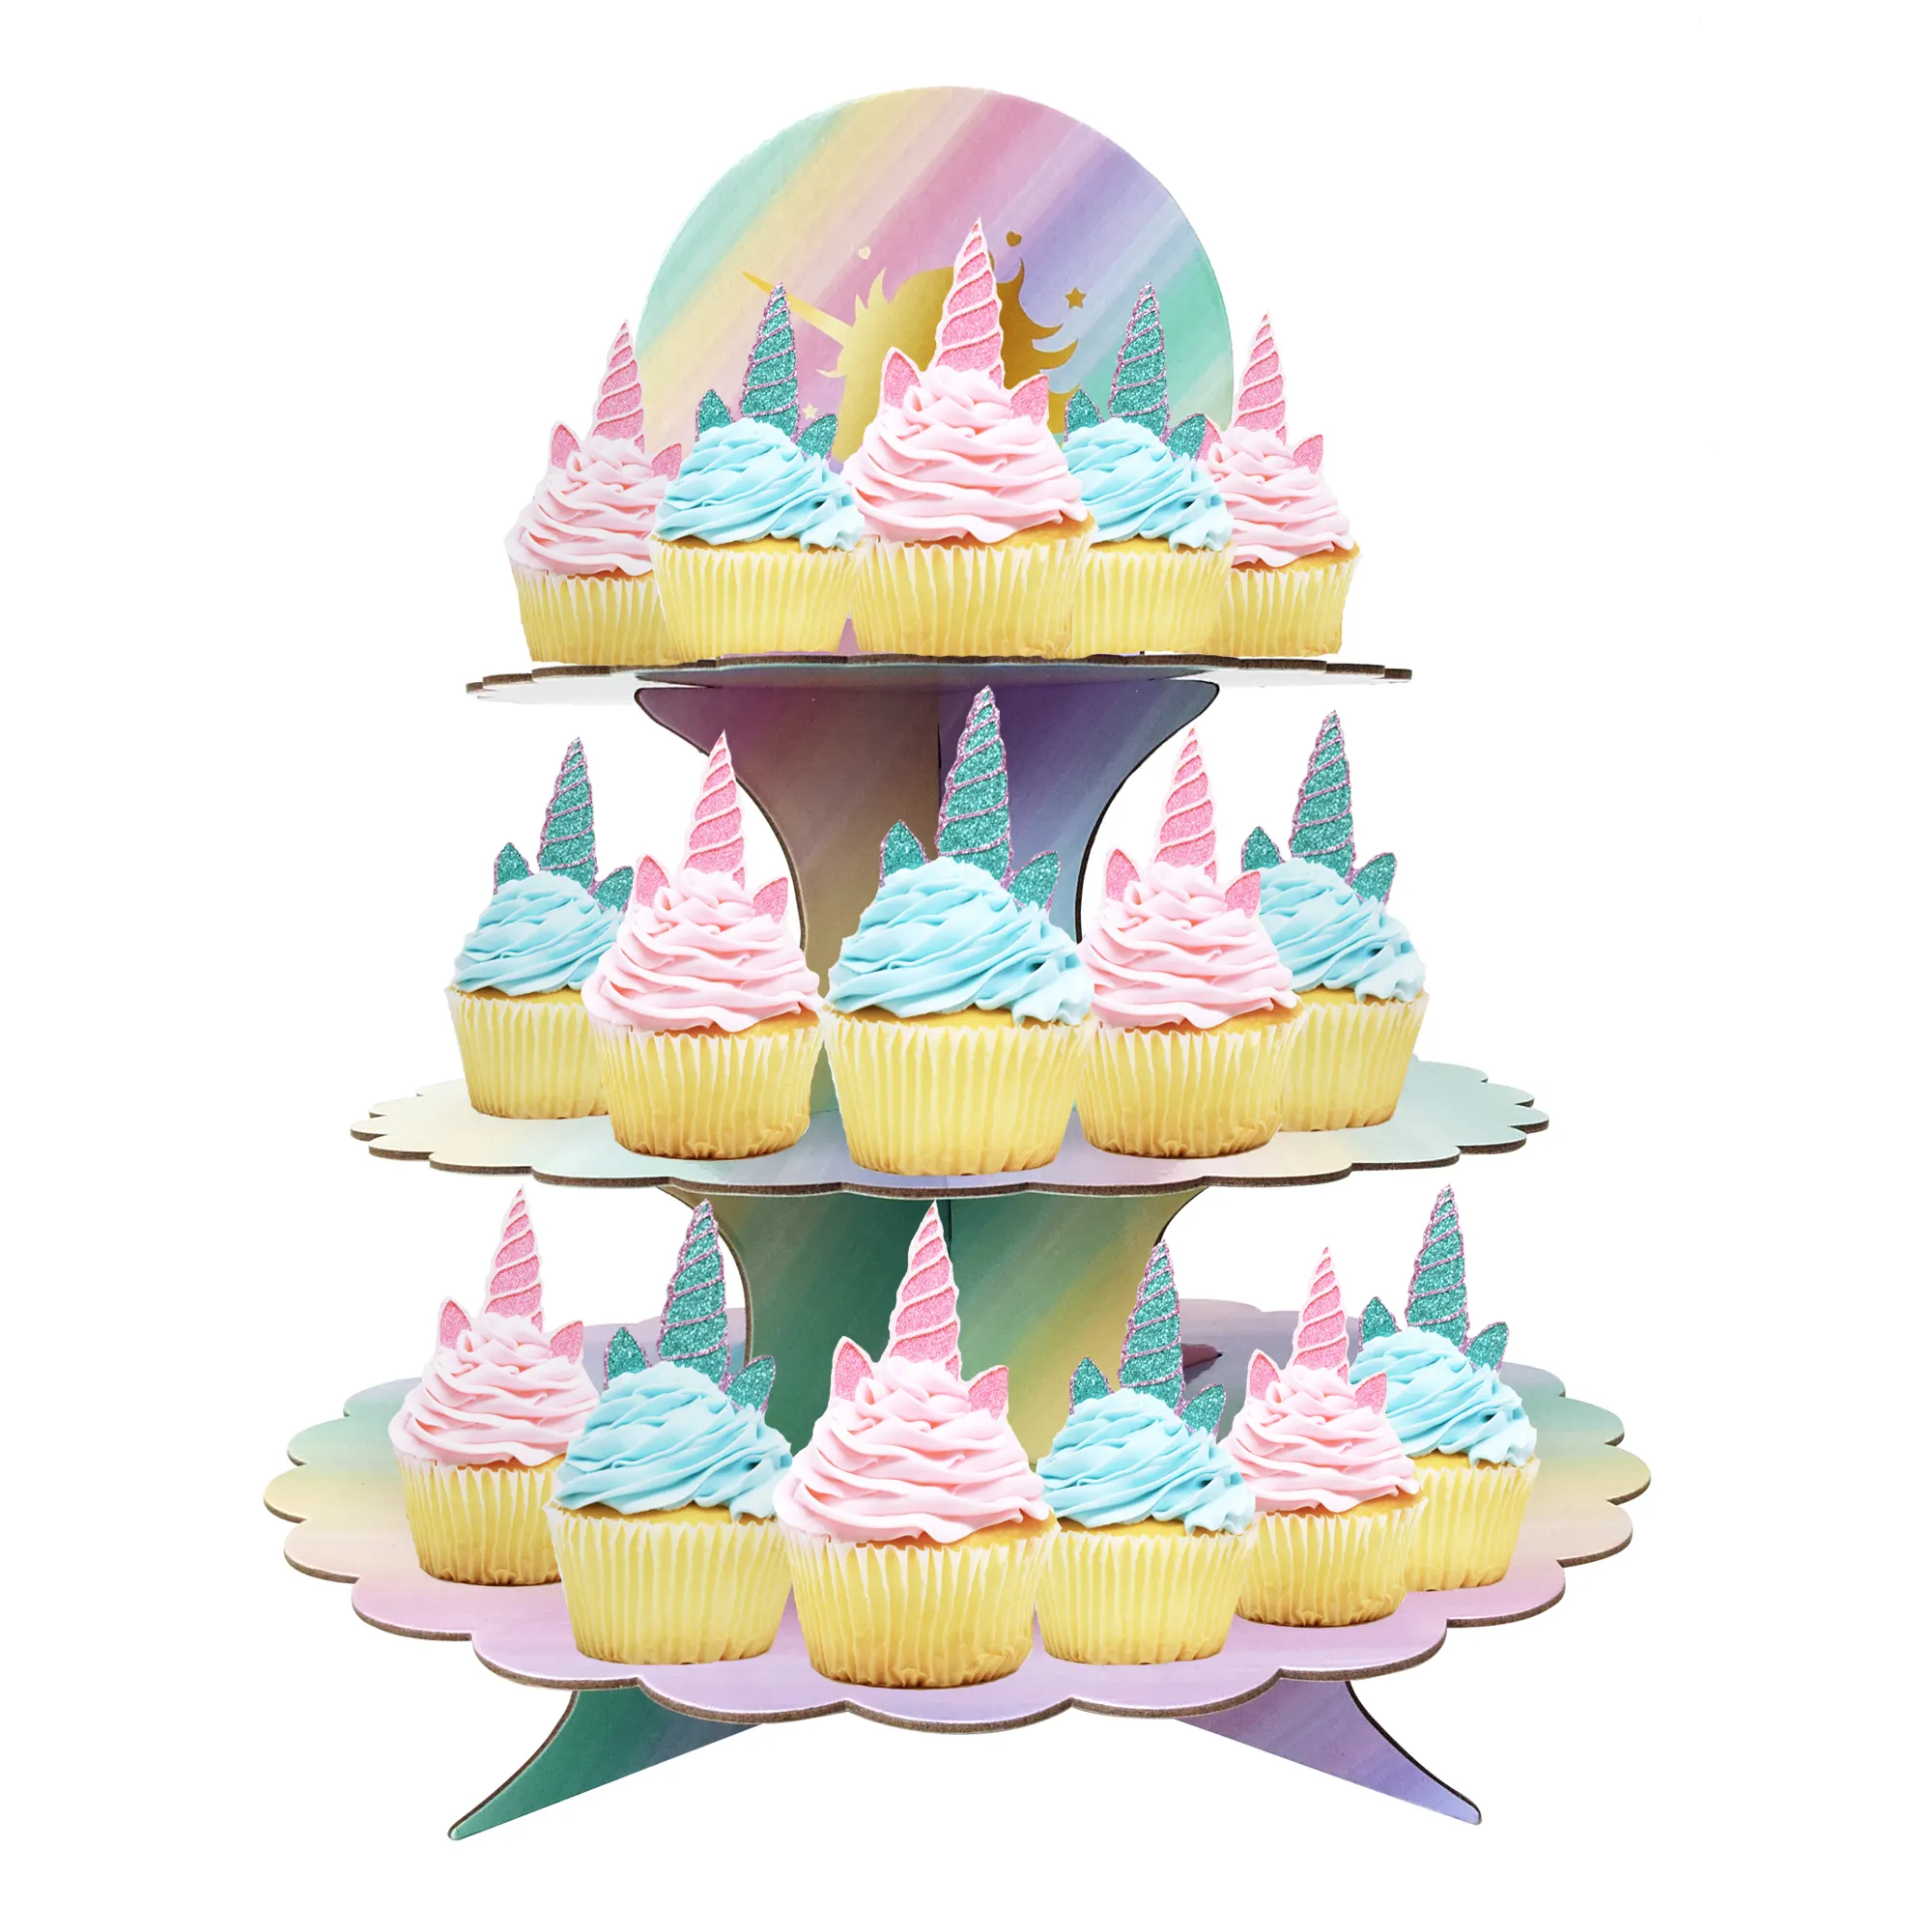 Unicorn Birthday Party Decorations Supplies Carriage Paper Cardboard Unicorn Party Decoration 3 Tier Cupcake Stand Cake Topper